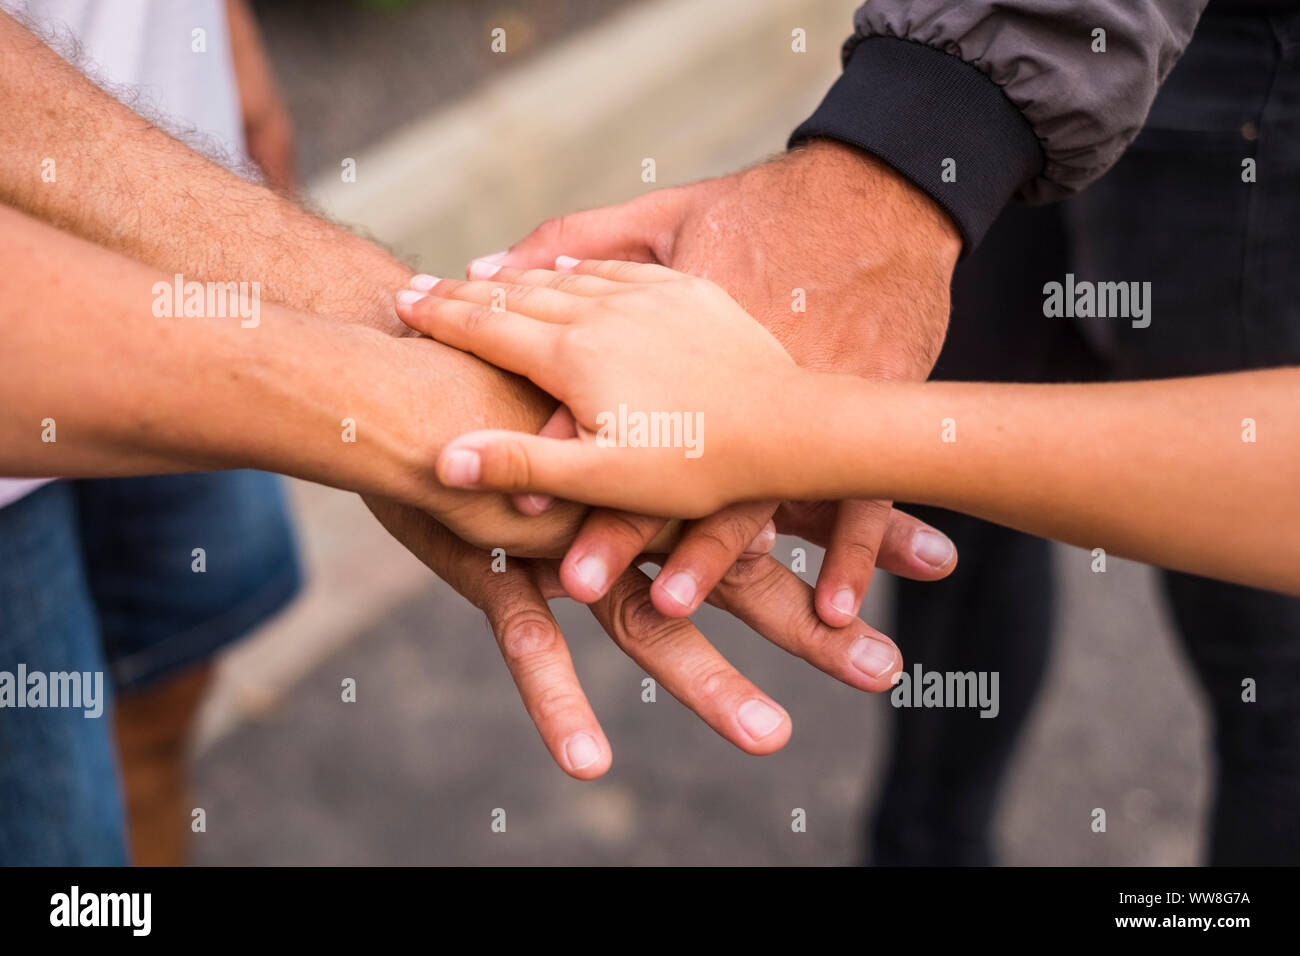 team and family concept image with hands touching together in outdoor, love and relationship and friendship picture, caucasian people Stock Photo